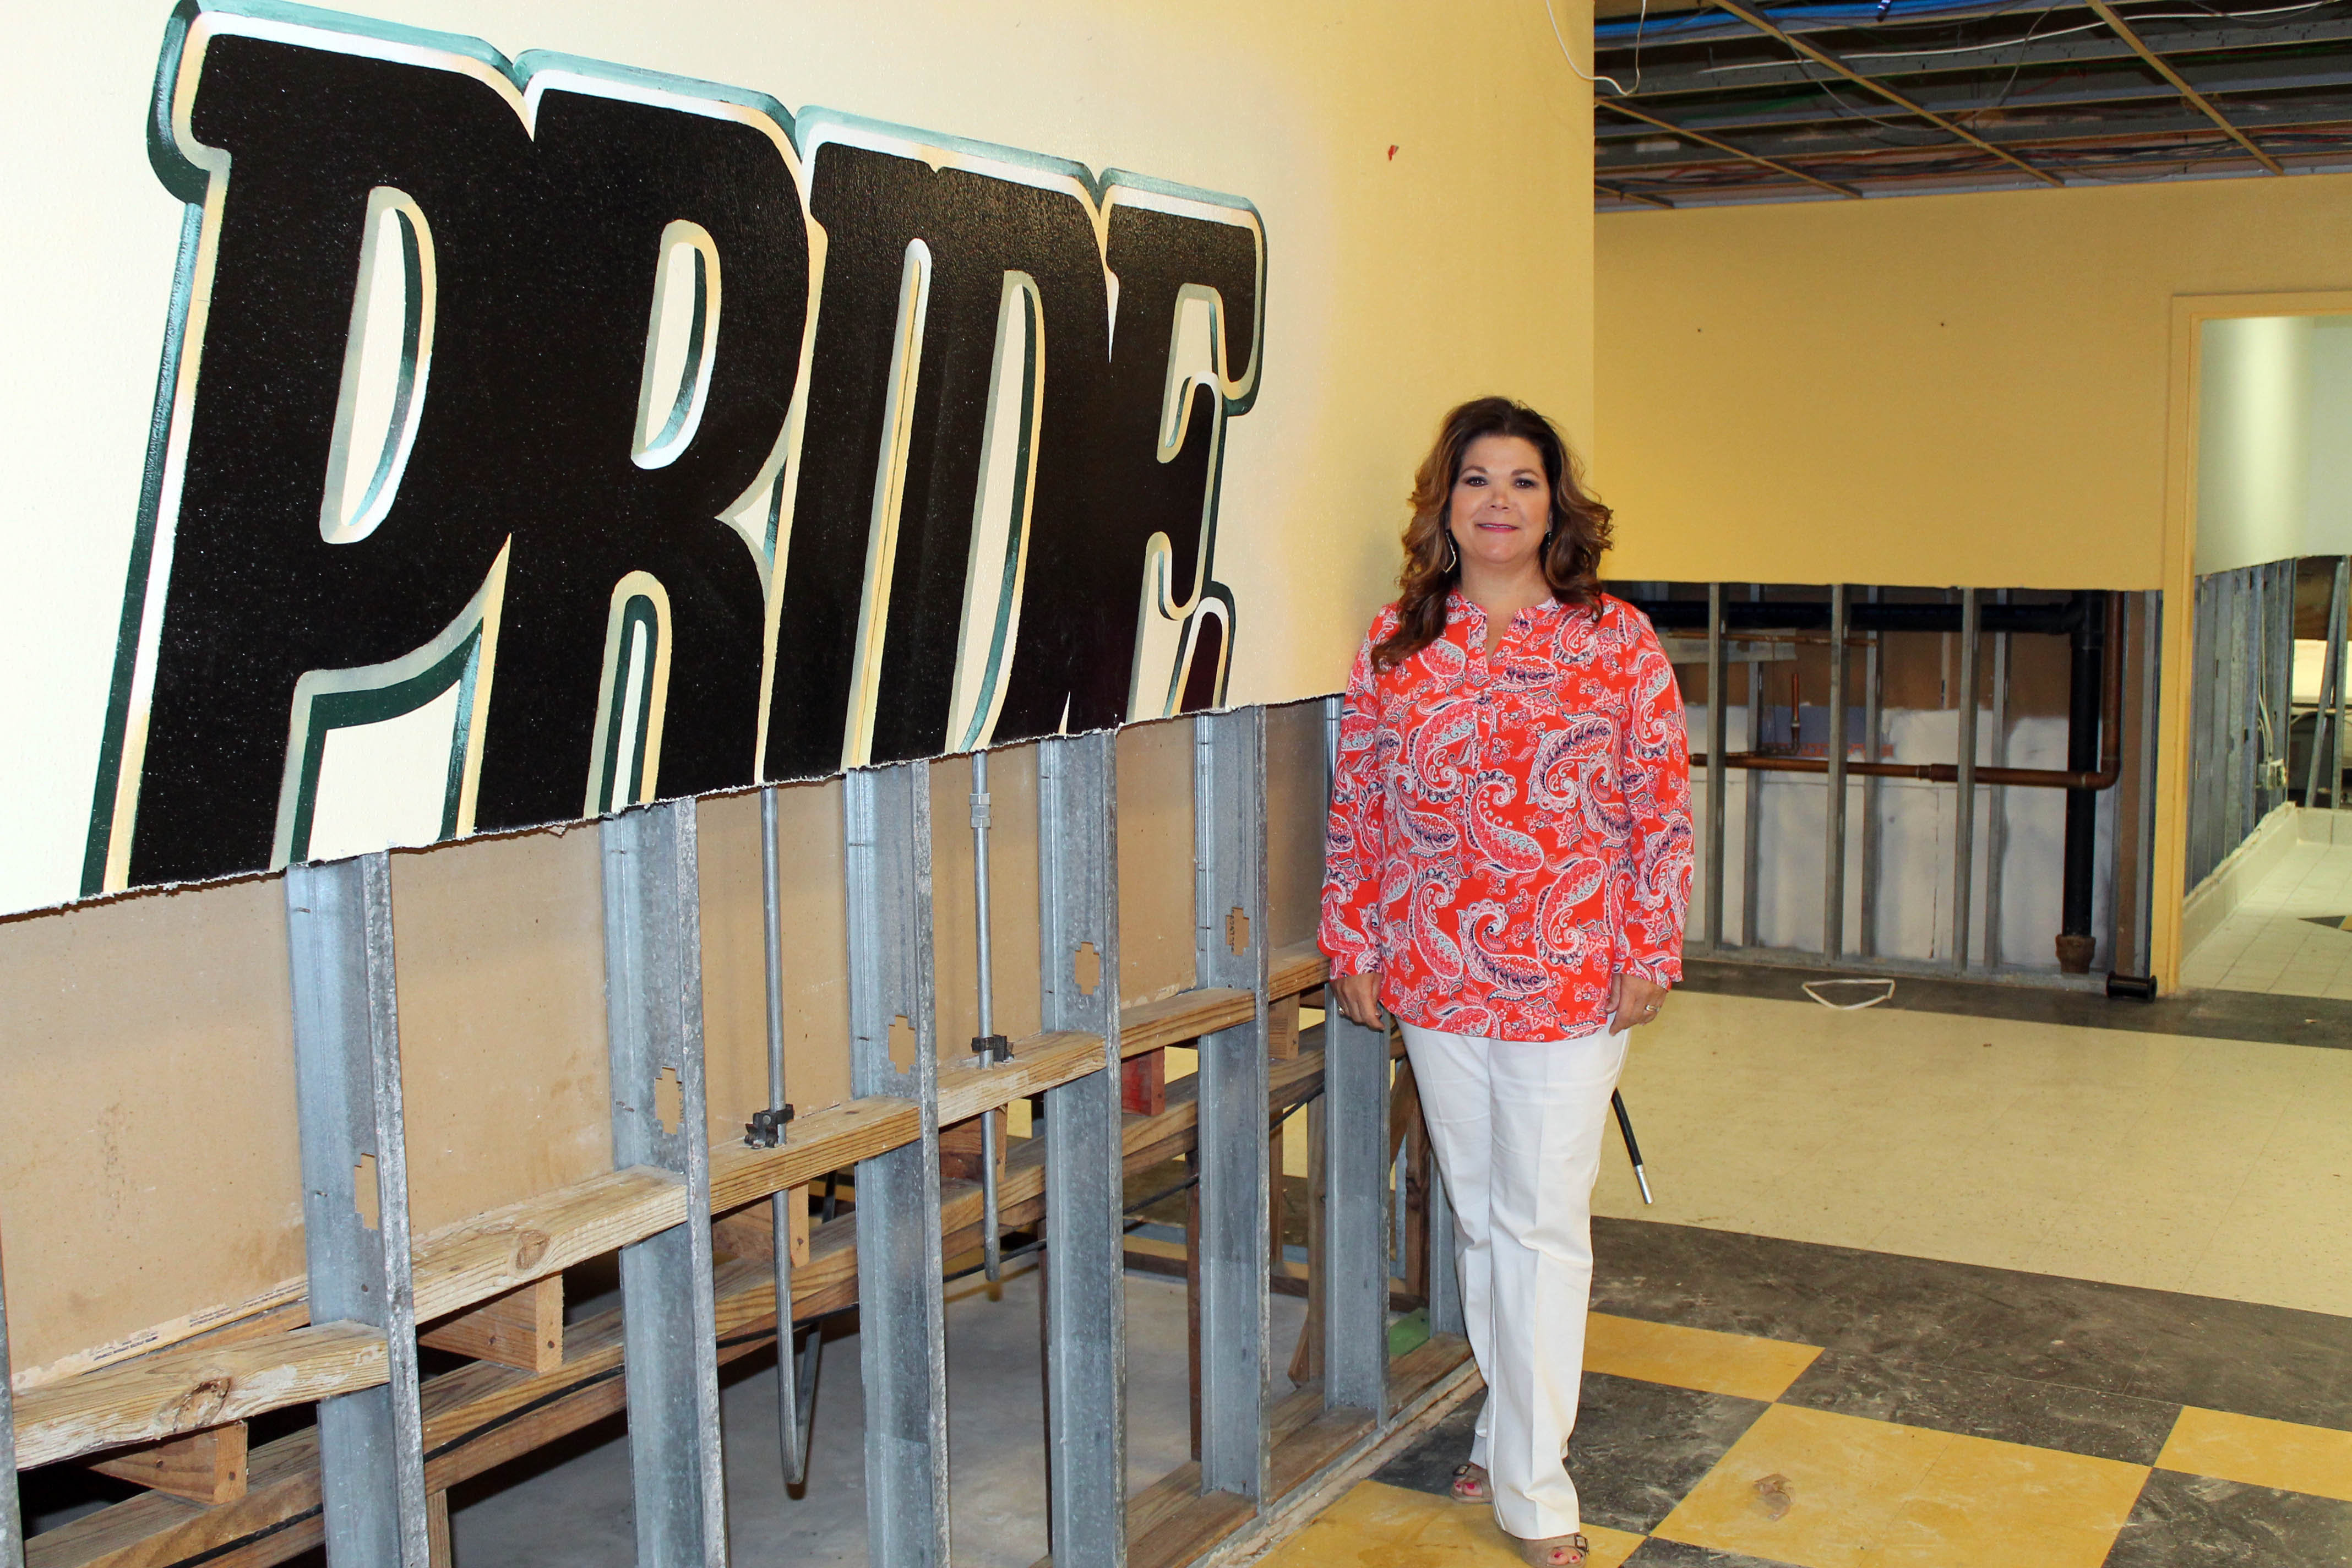 Mia Edwards next to a gutted wall with the word "Pride"